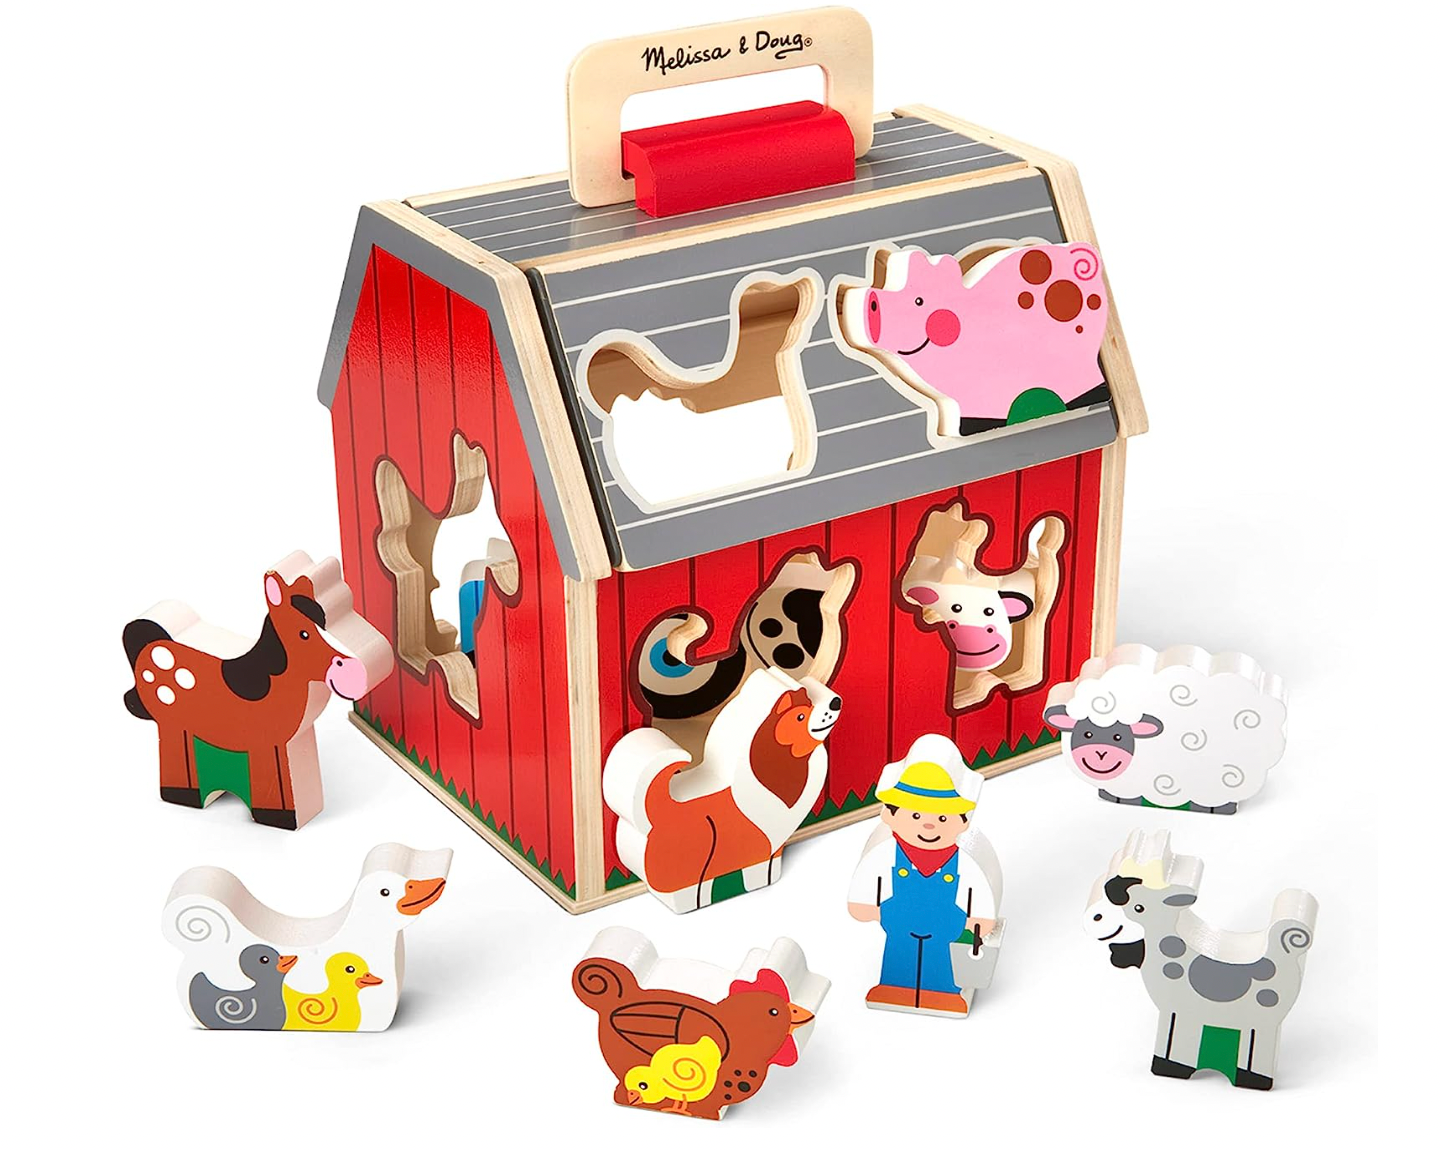 Melissa & Doug Wooden Take-Along Sorting Barn Toy with Flip-Up Roof and Handle, 10 Wooden Farm Play Pieces